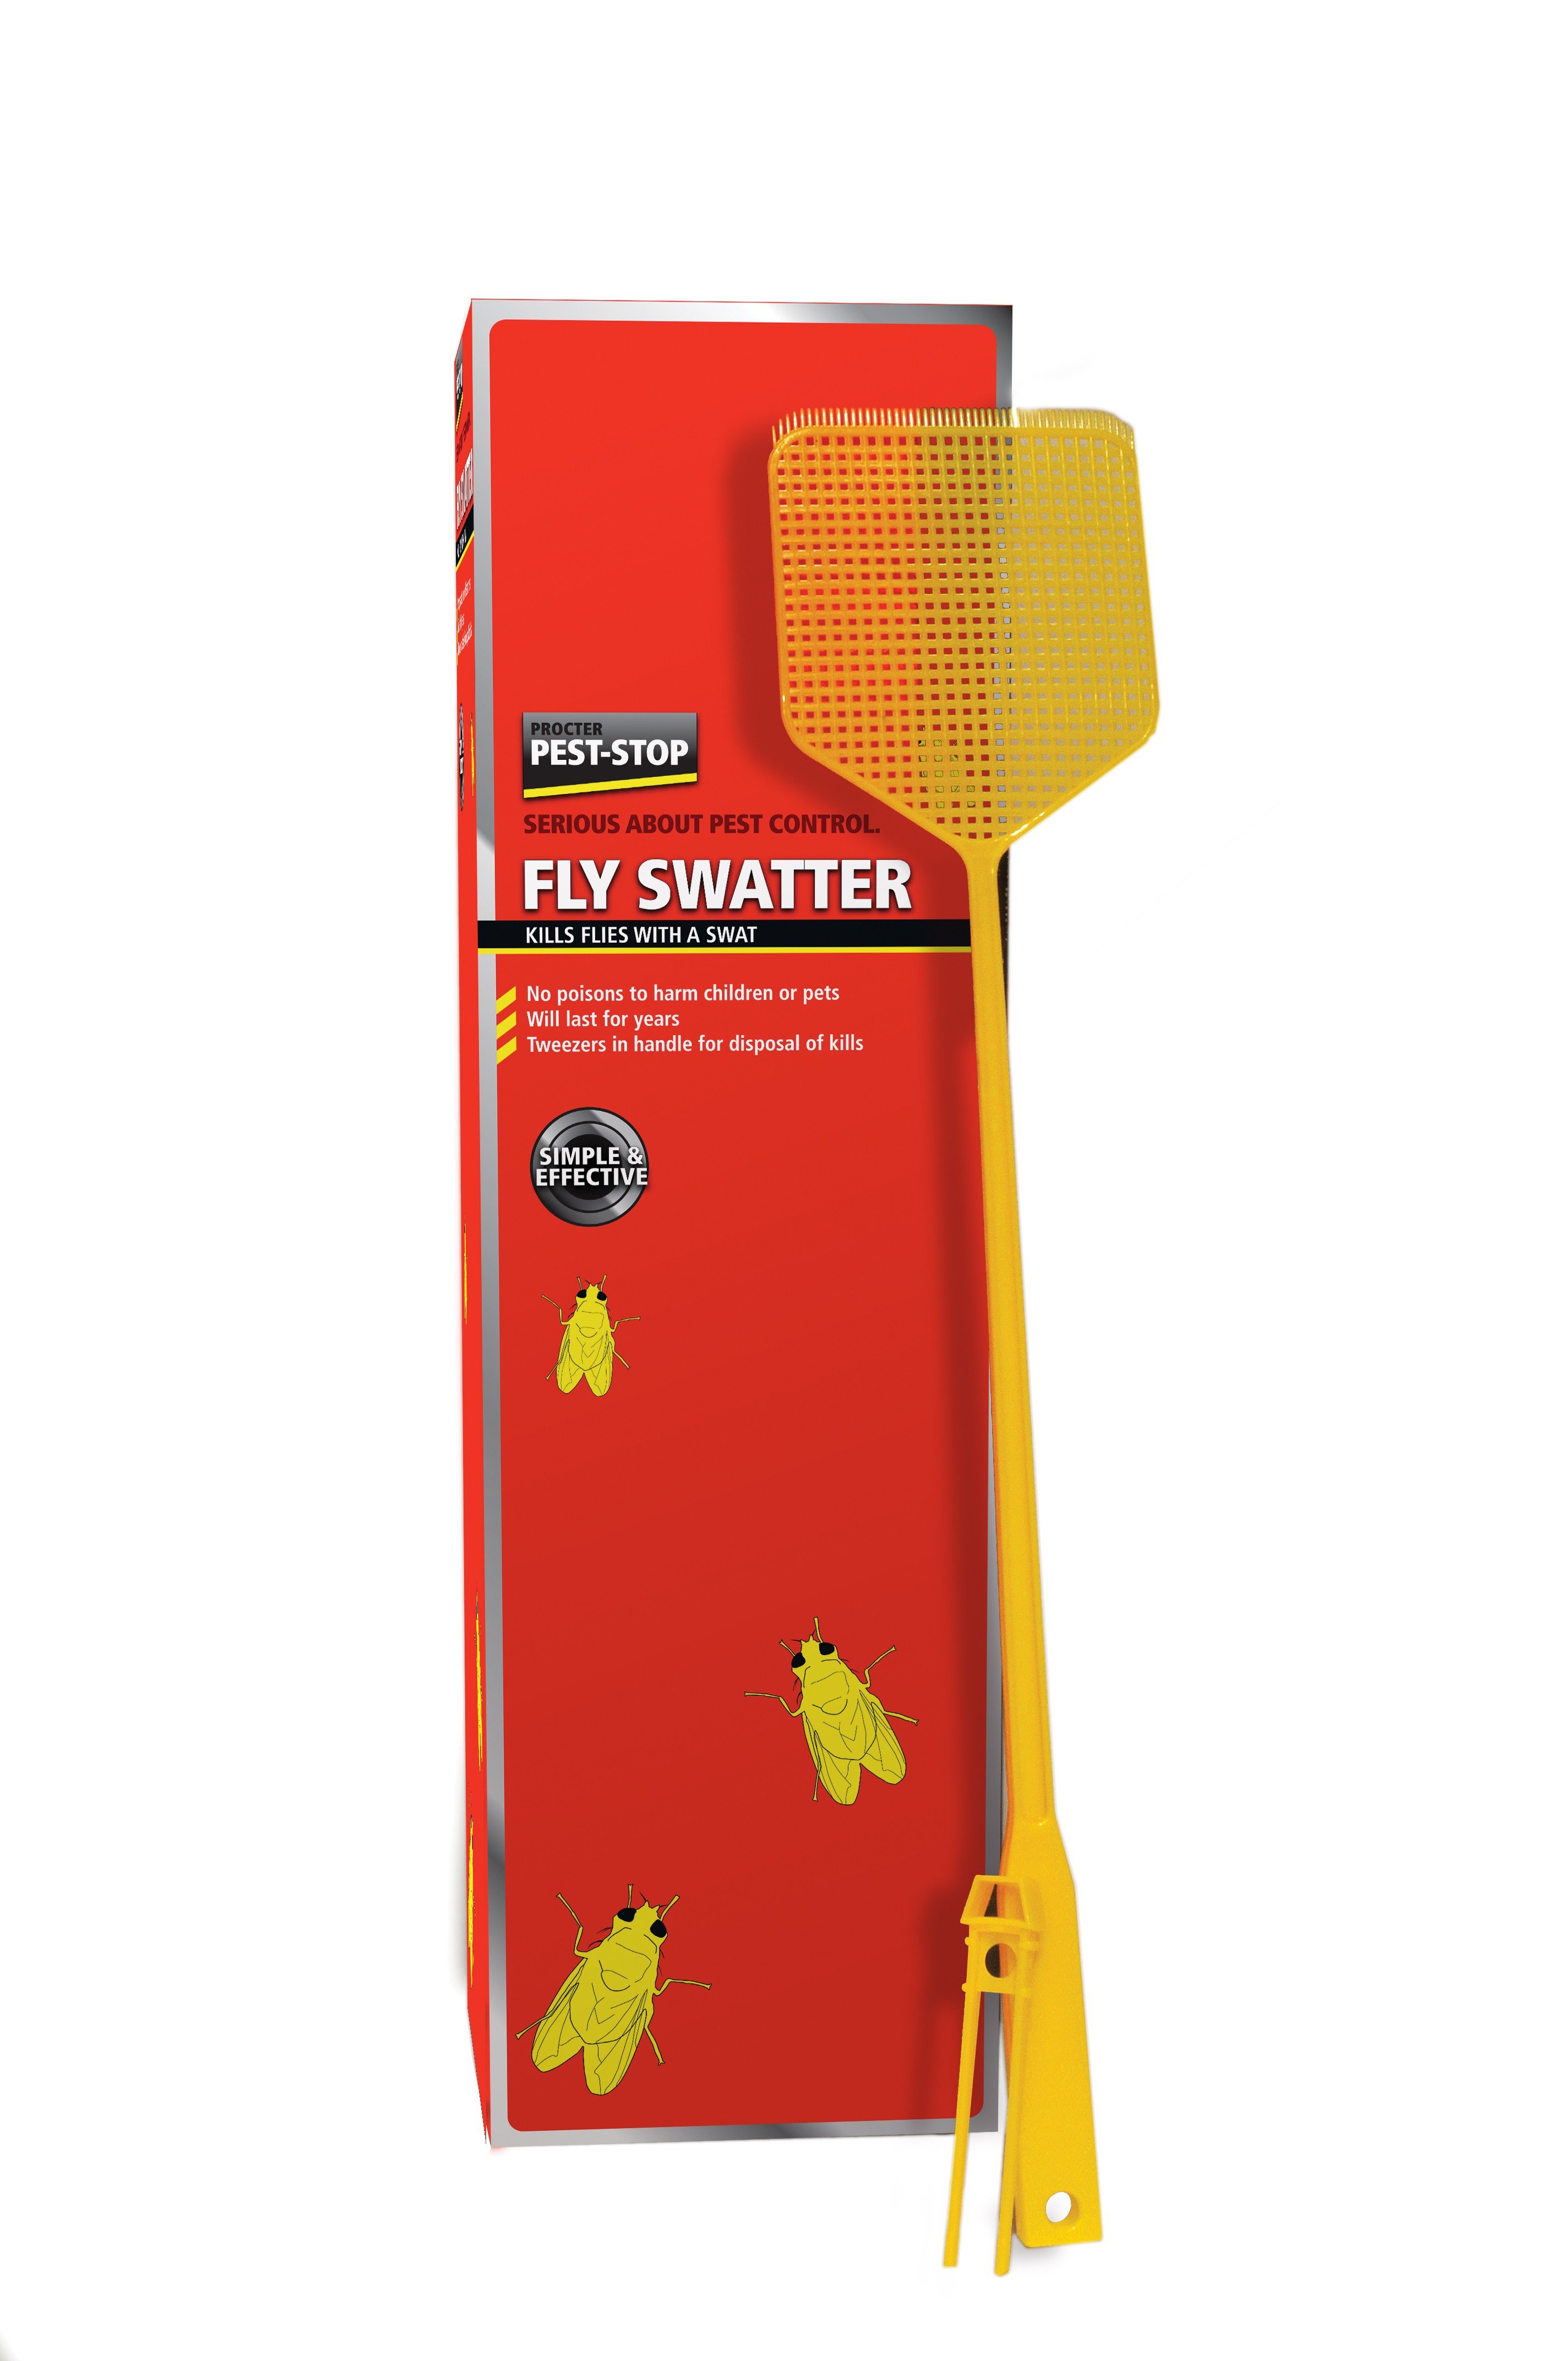 Pest Stop Fly swats